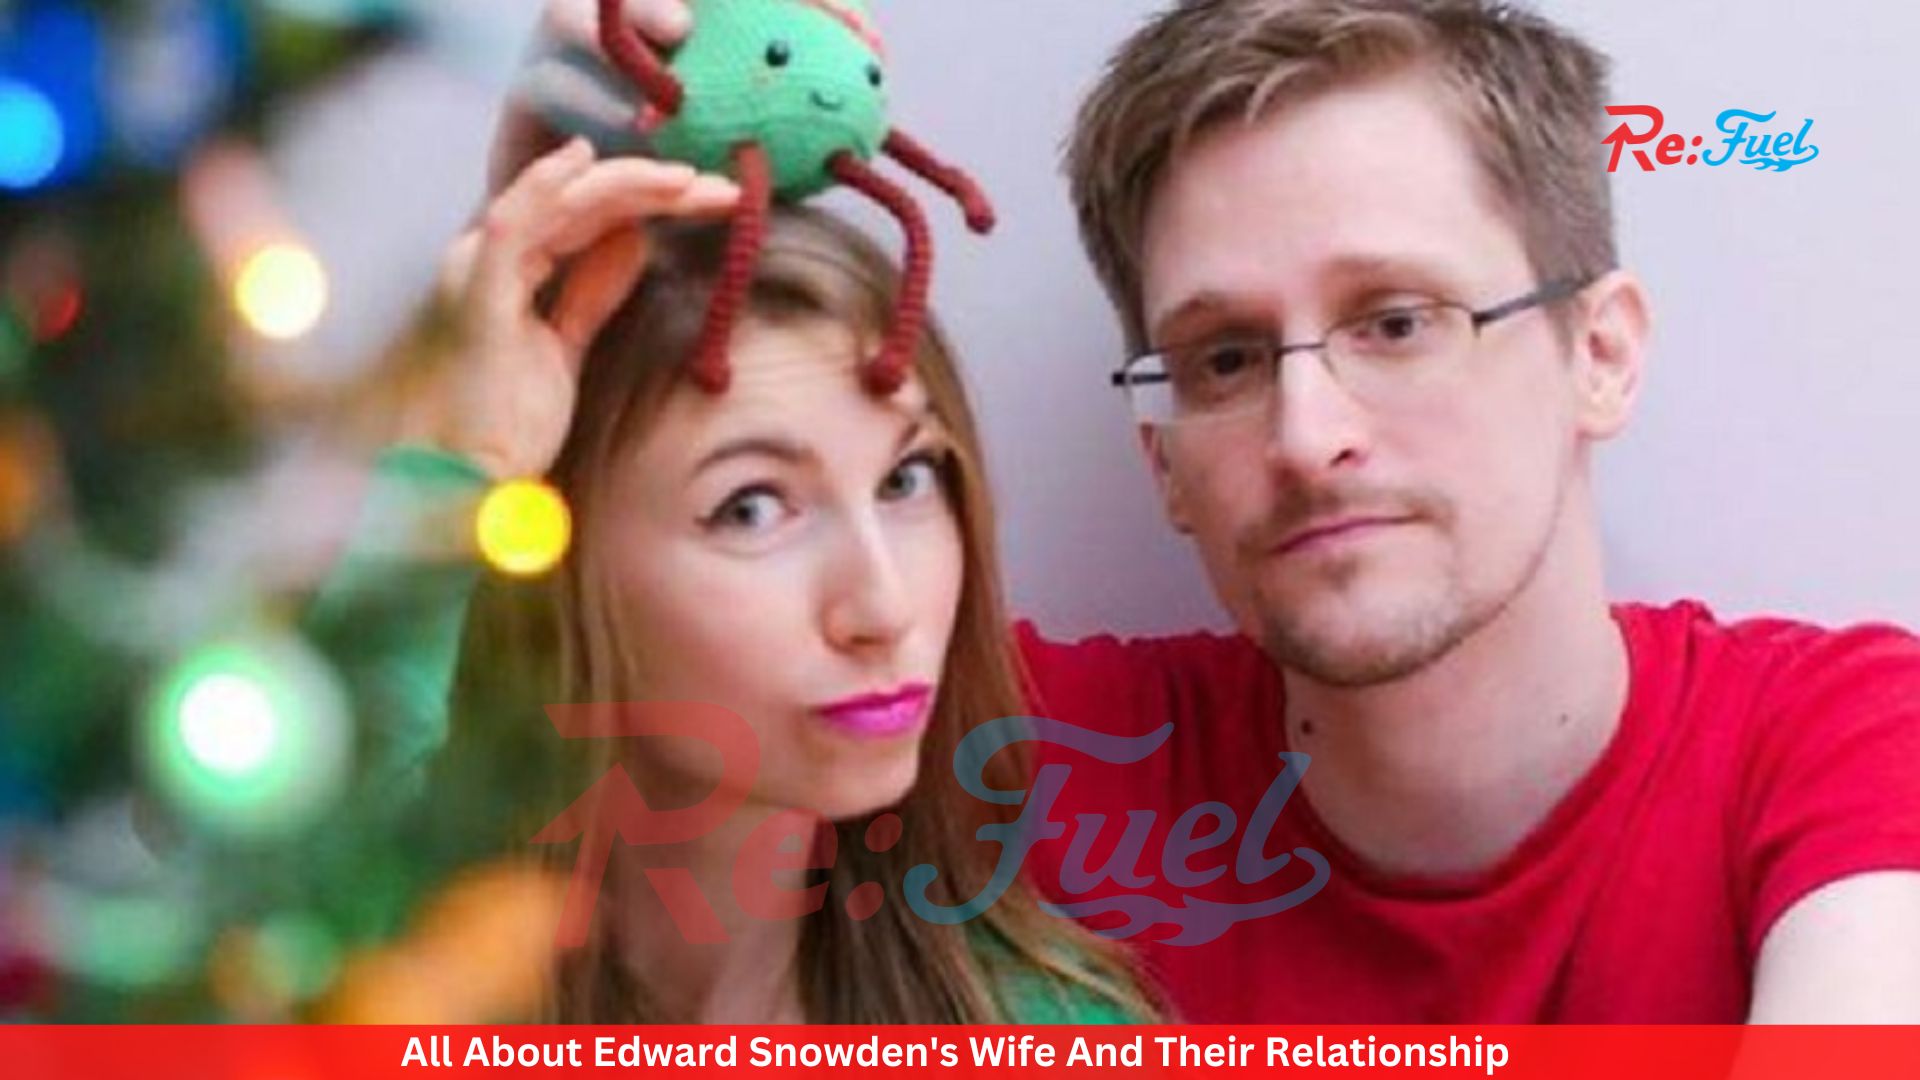 All About Edward Snowden's Wife And Their Relationship